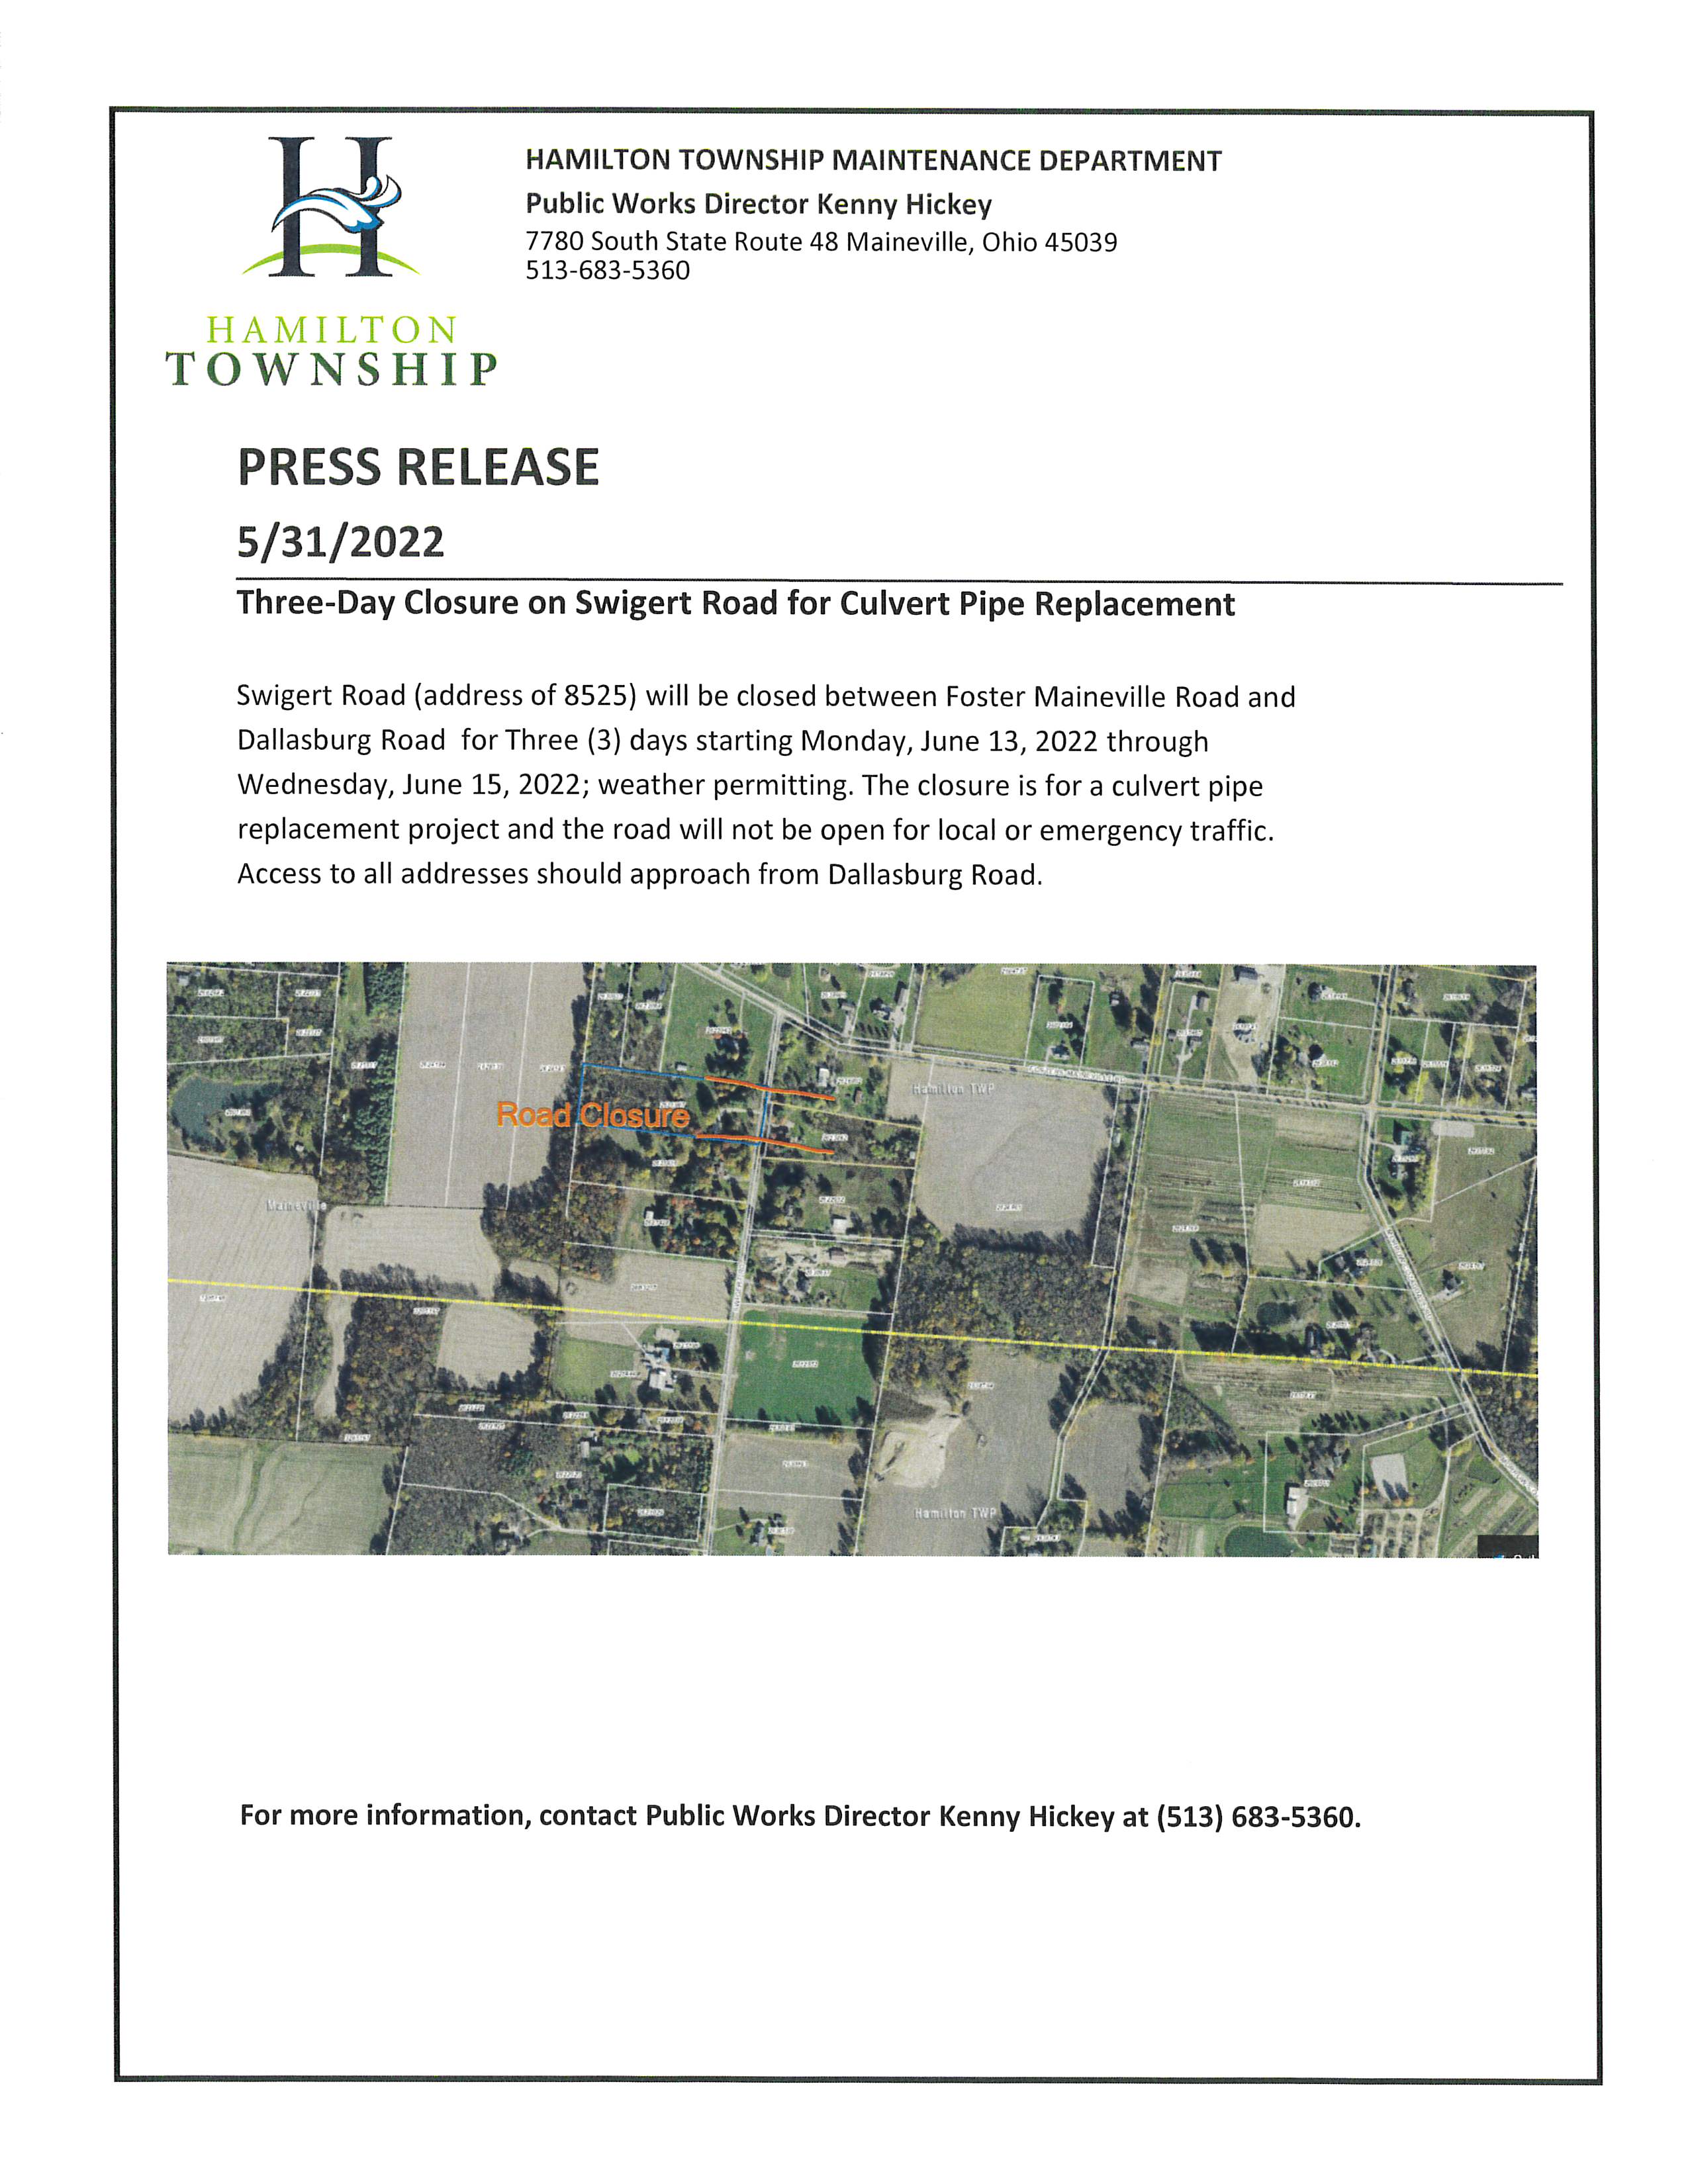 Three-Day Closure on Swigert Road for Culvert Pipe Replacement Press Release